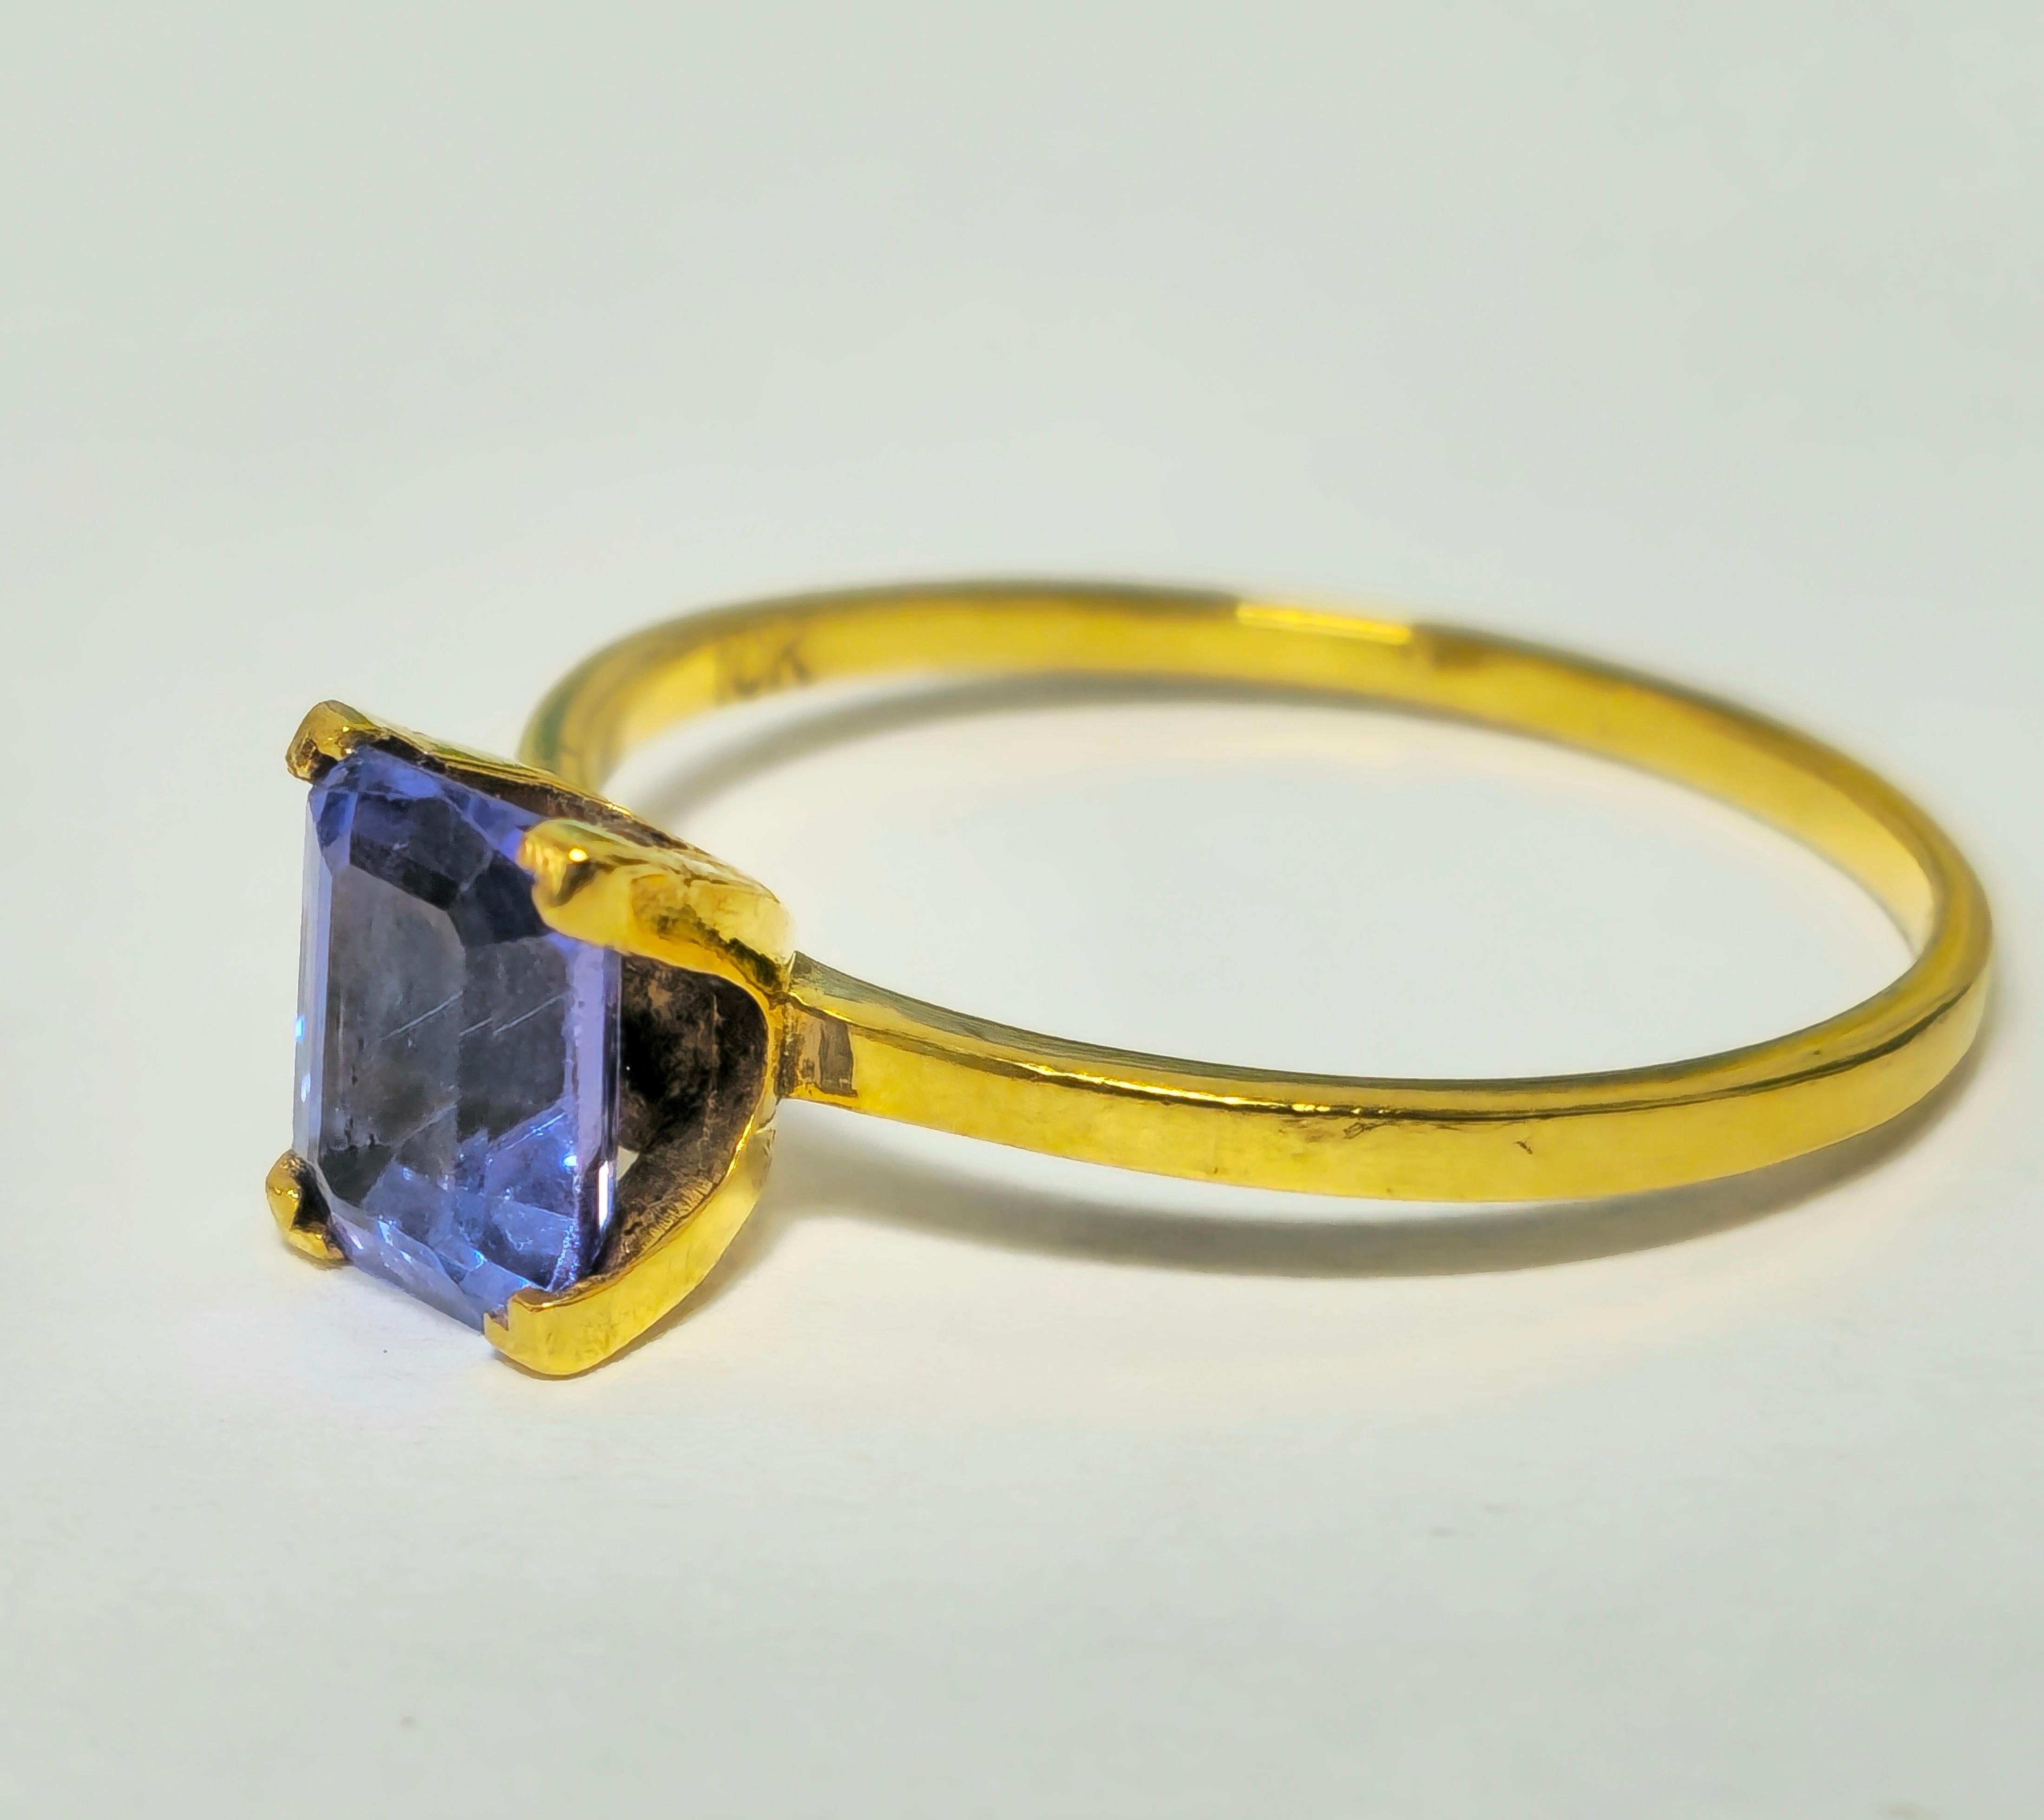 Fashioned from 10k yellow gold, this collectible ring showcases a stunning 2.50 carat emerald-cut Tanzanite gemstone, boasting excellent color and saturation. Weighing 2.10 grams, it offers a comfortable fit for US size 10, with complimentary ring